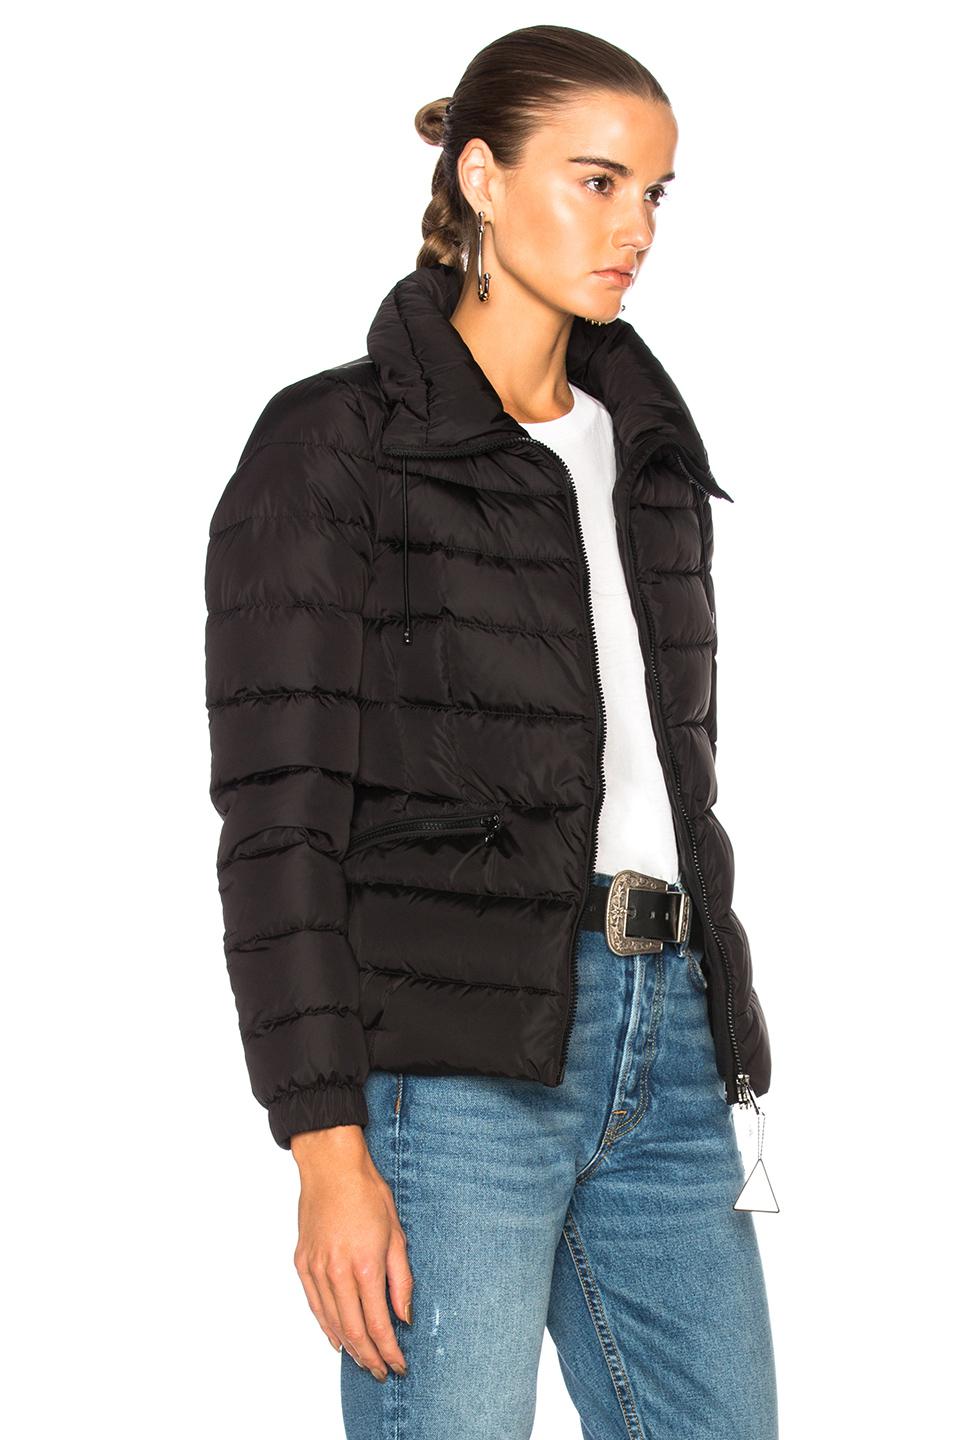 Moncler Synthetic Irex Jacket in Black 